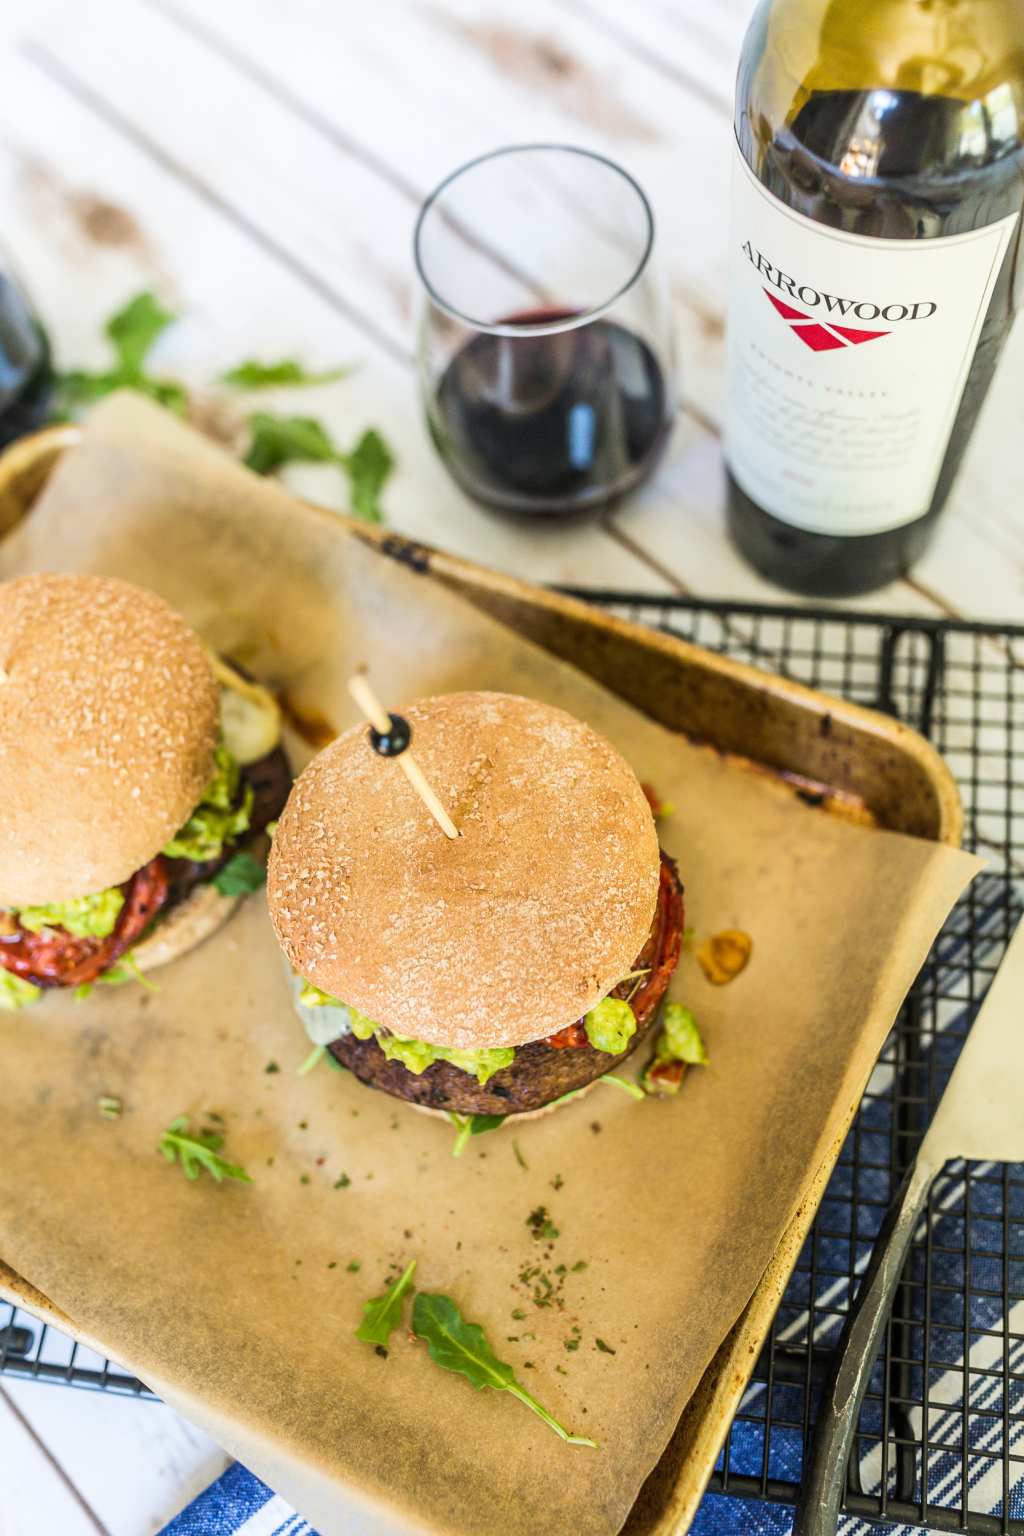 California Burger paired with Arrowood wine.